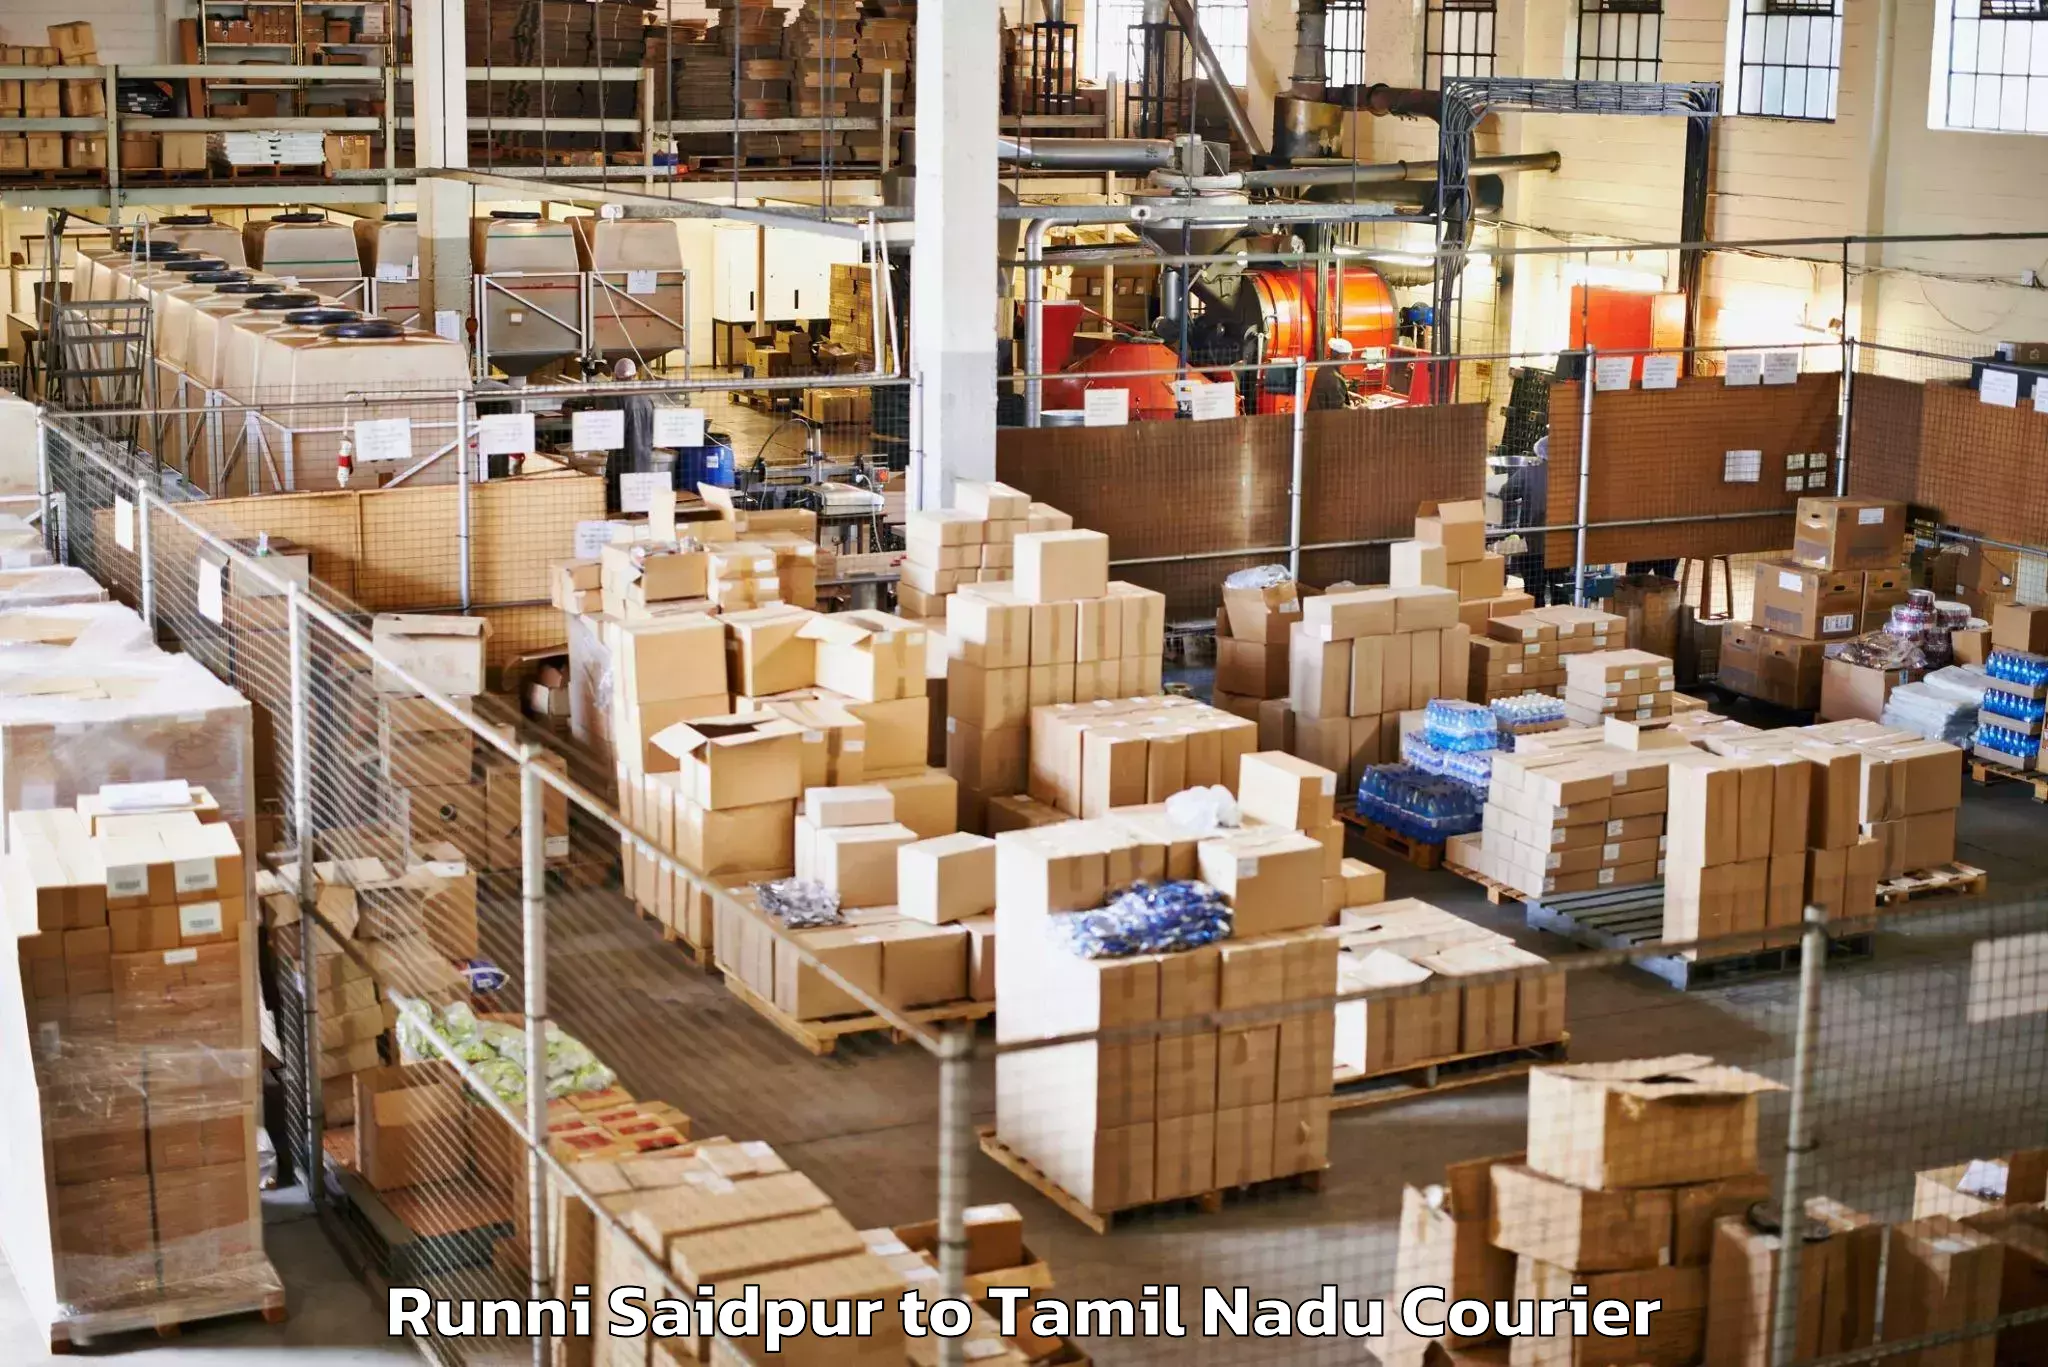 Reliable baggage delivery in Runni Saidpur to Anthiyur